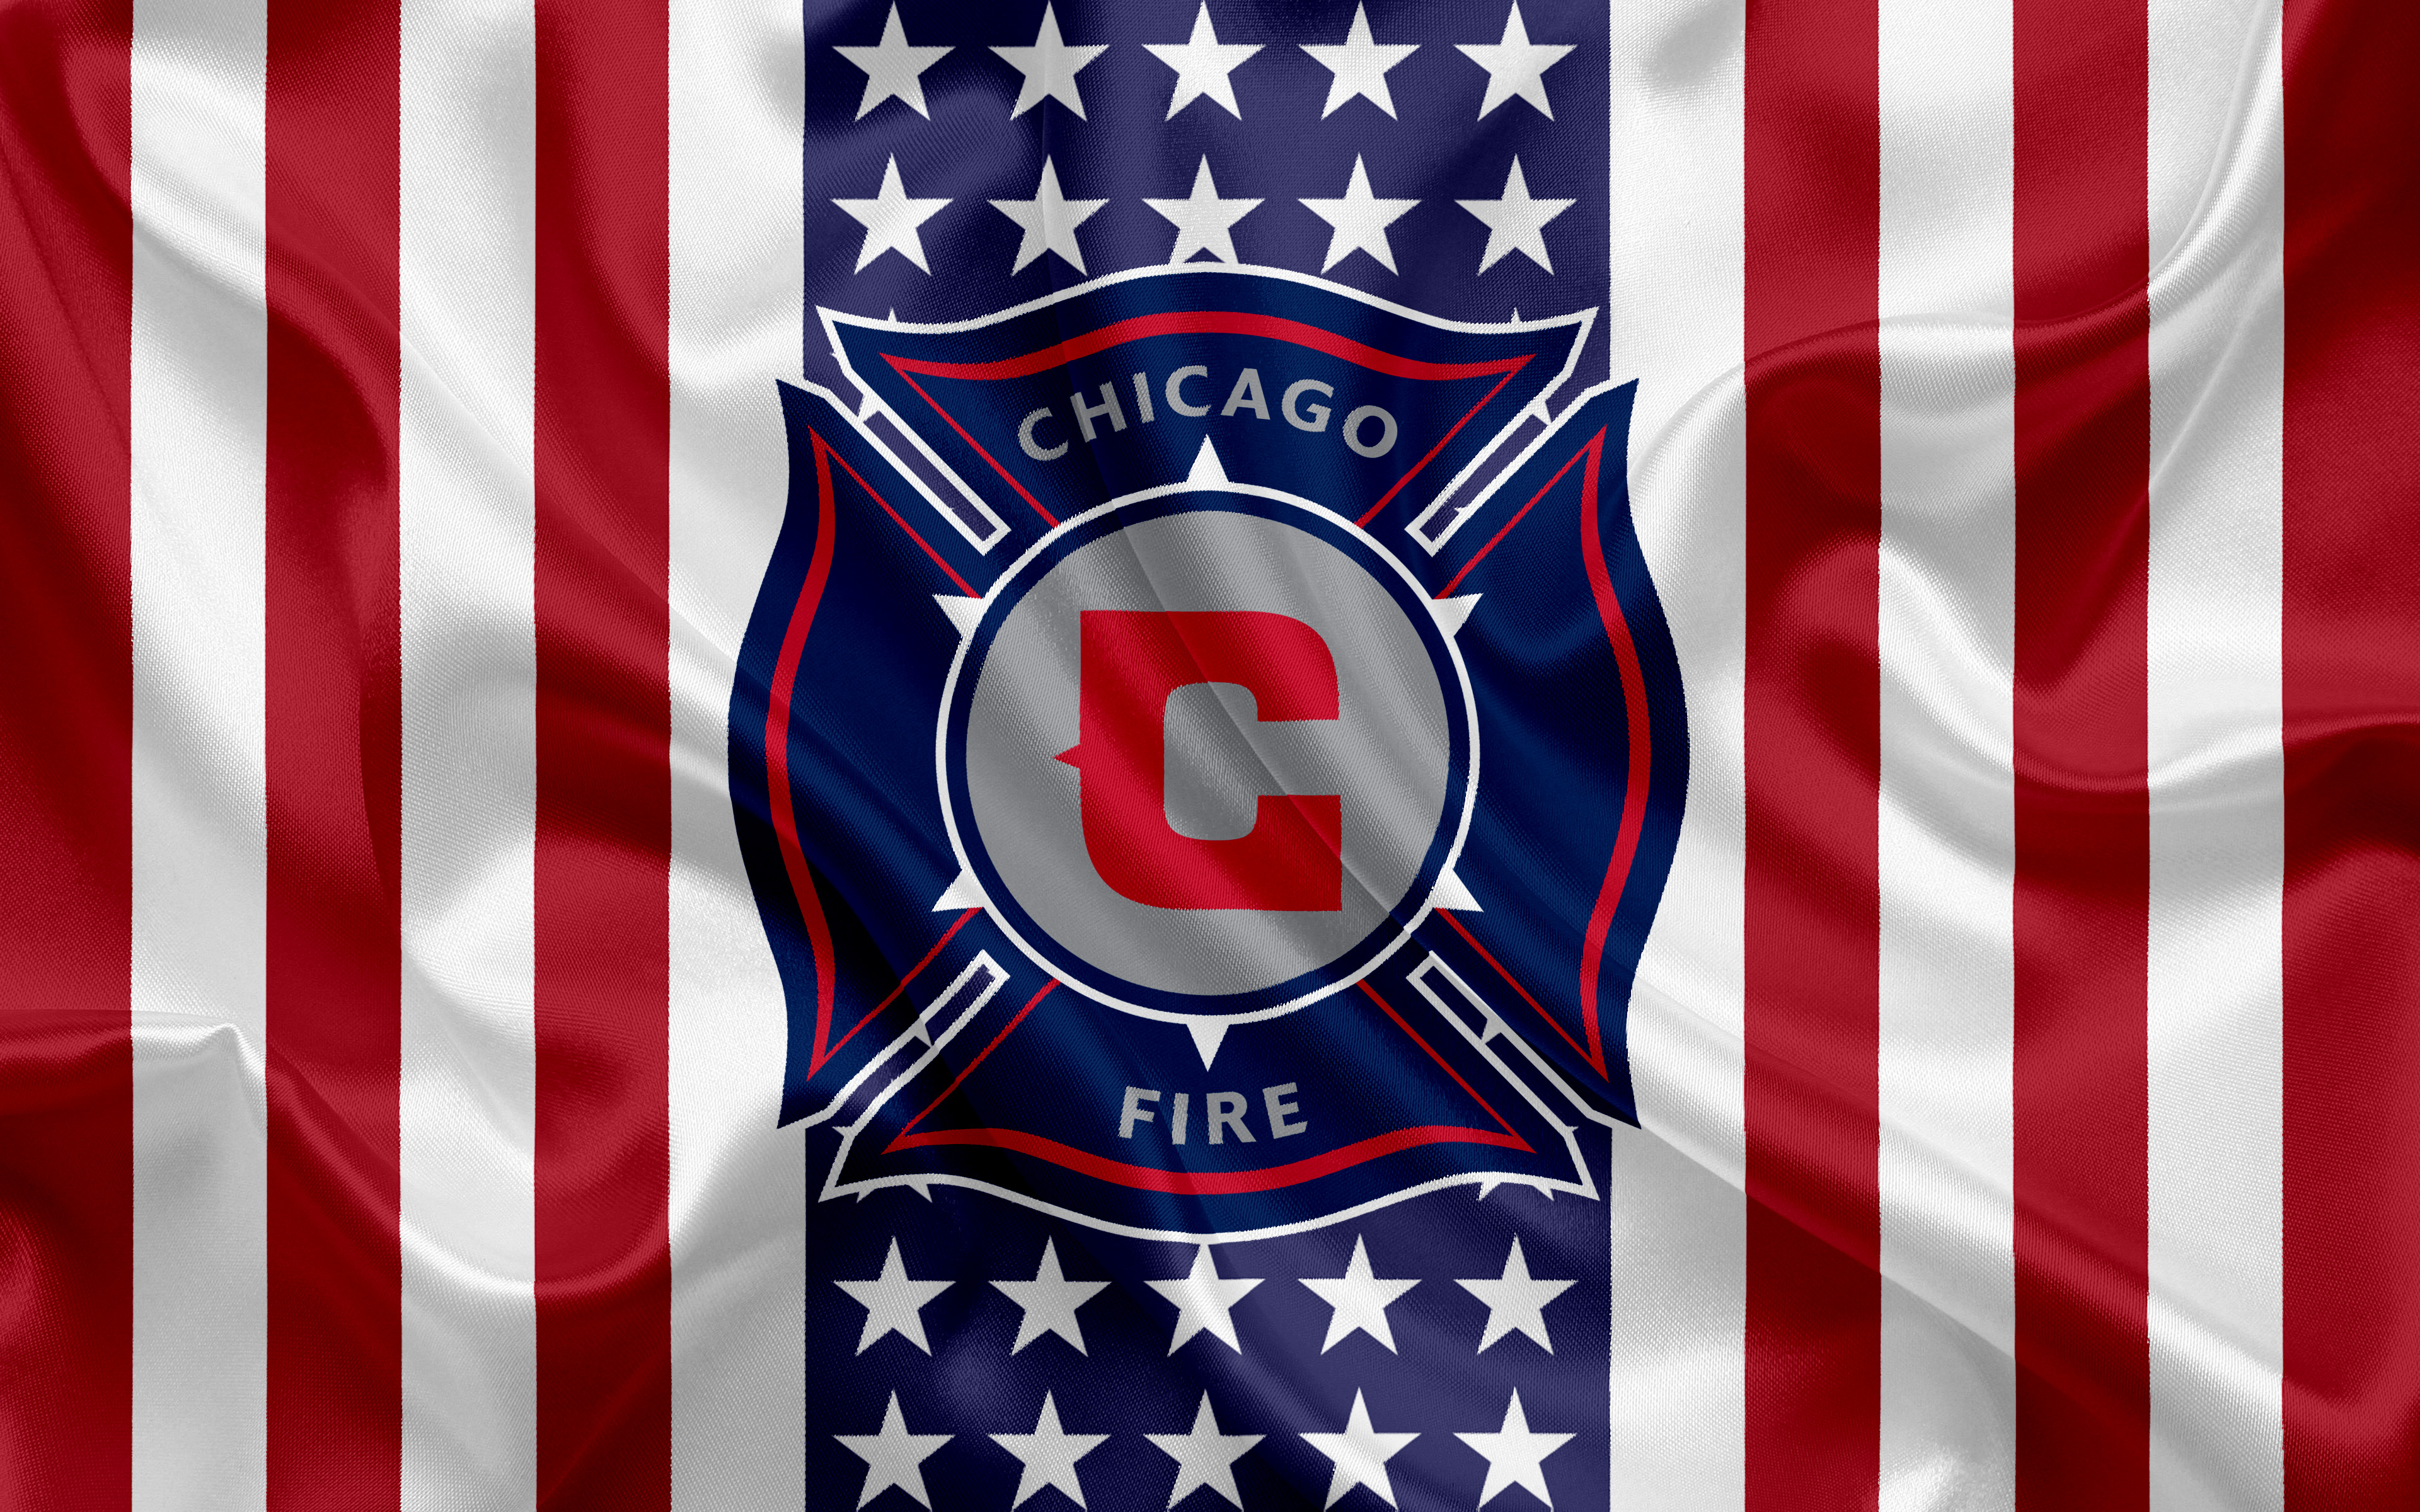 Chicago Fire Soccer Club 4k Ultra HD Wallpaper Background Image